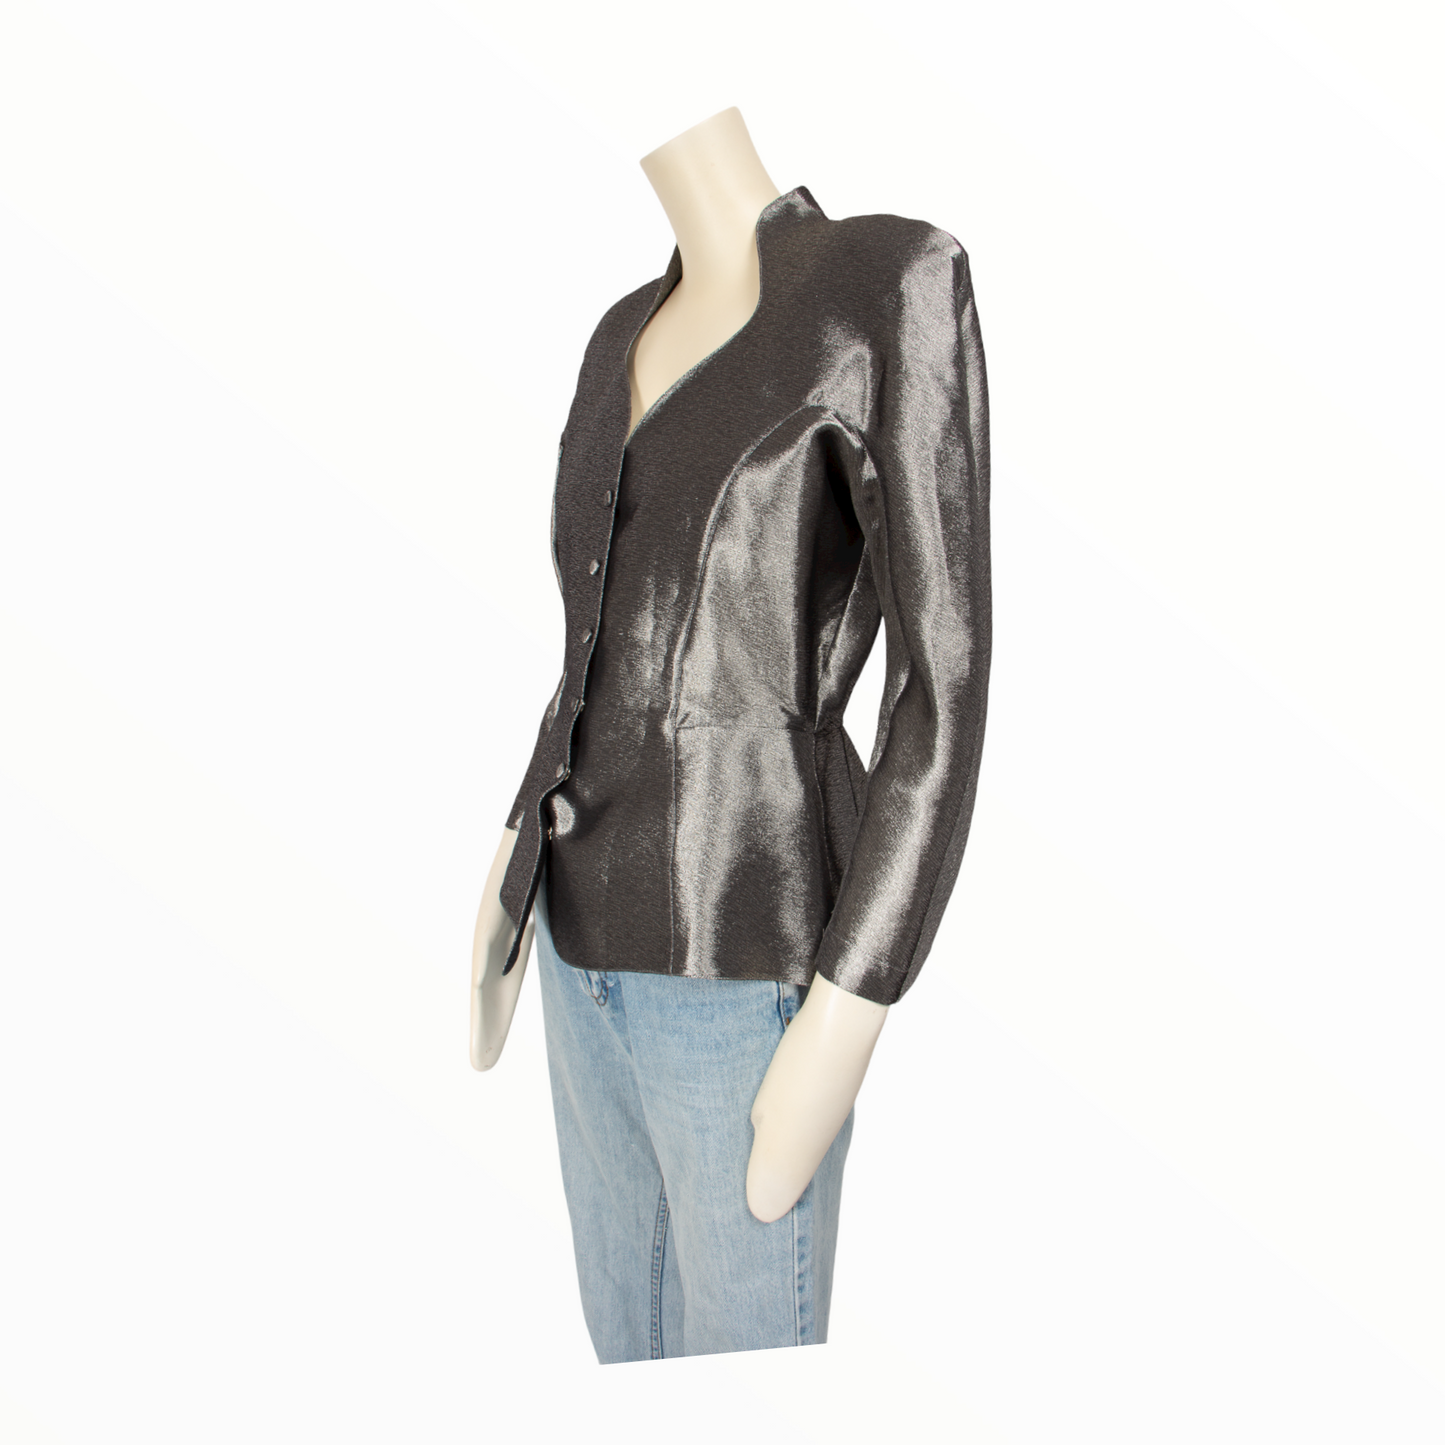 THIERRY MUGLER Jackets vintage Lysis Paris pre-owned secondhand